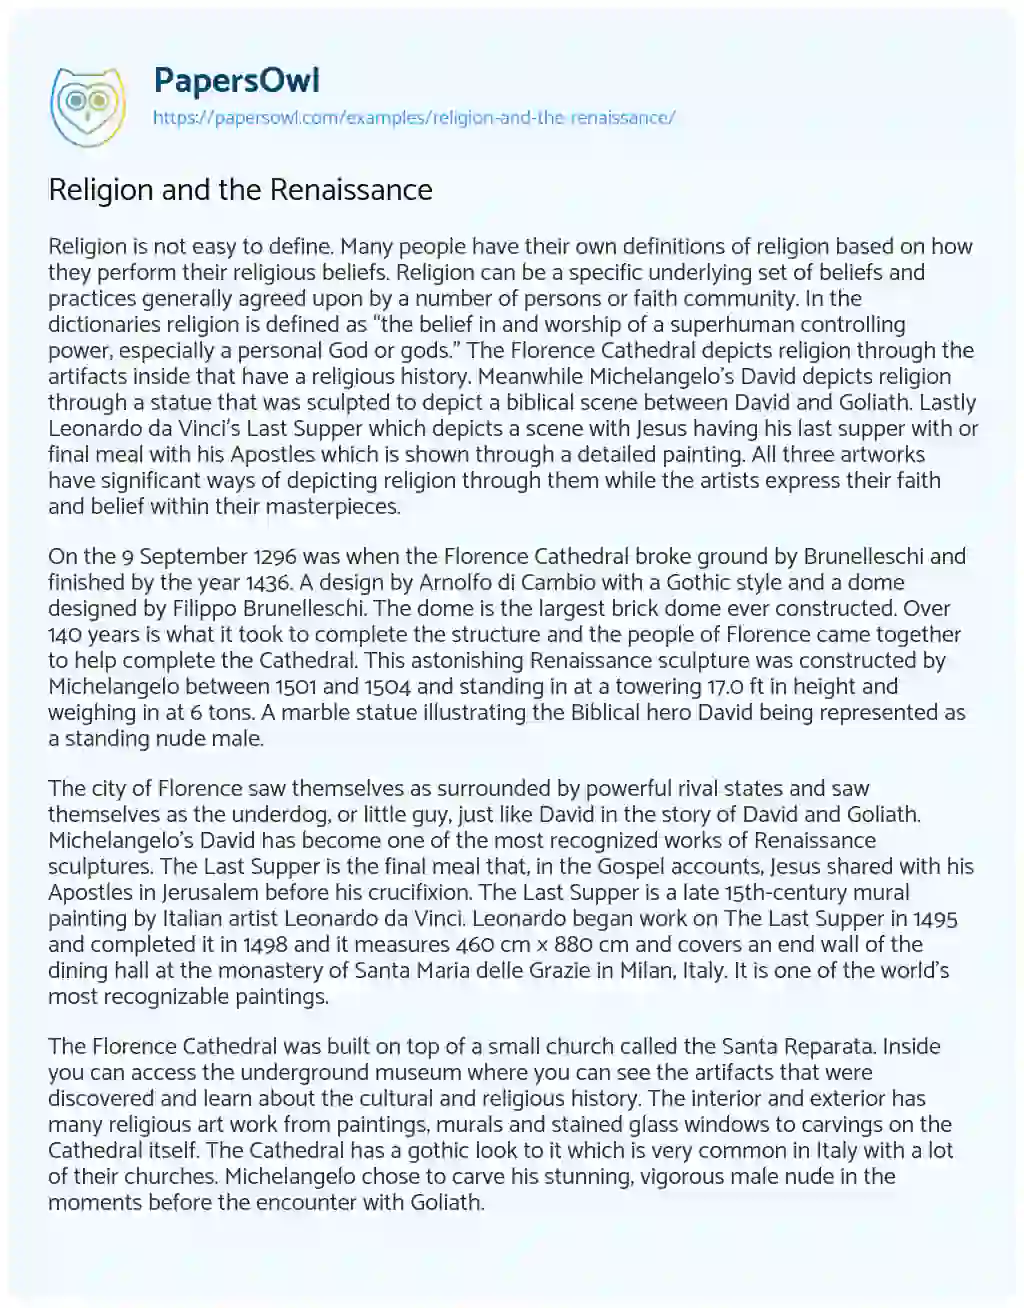 Essay on Religion and the Renaissance